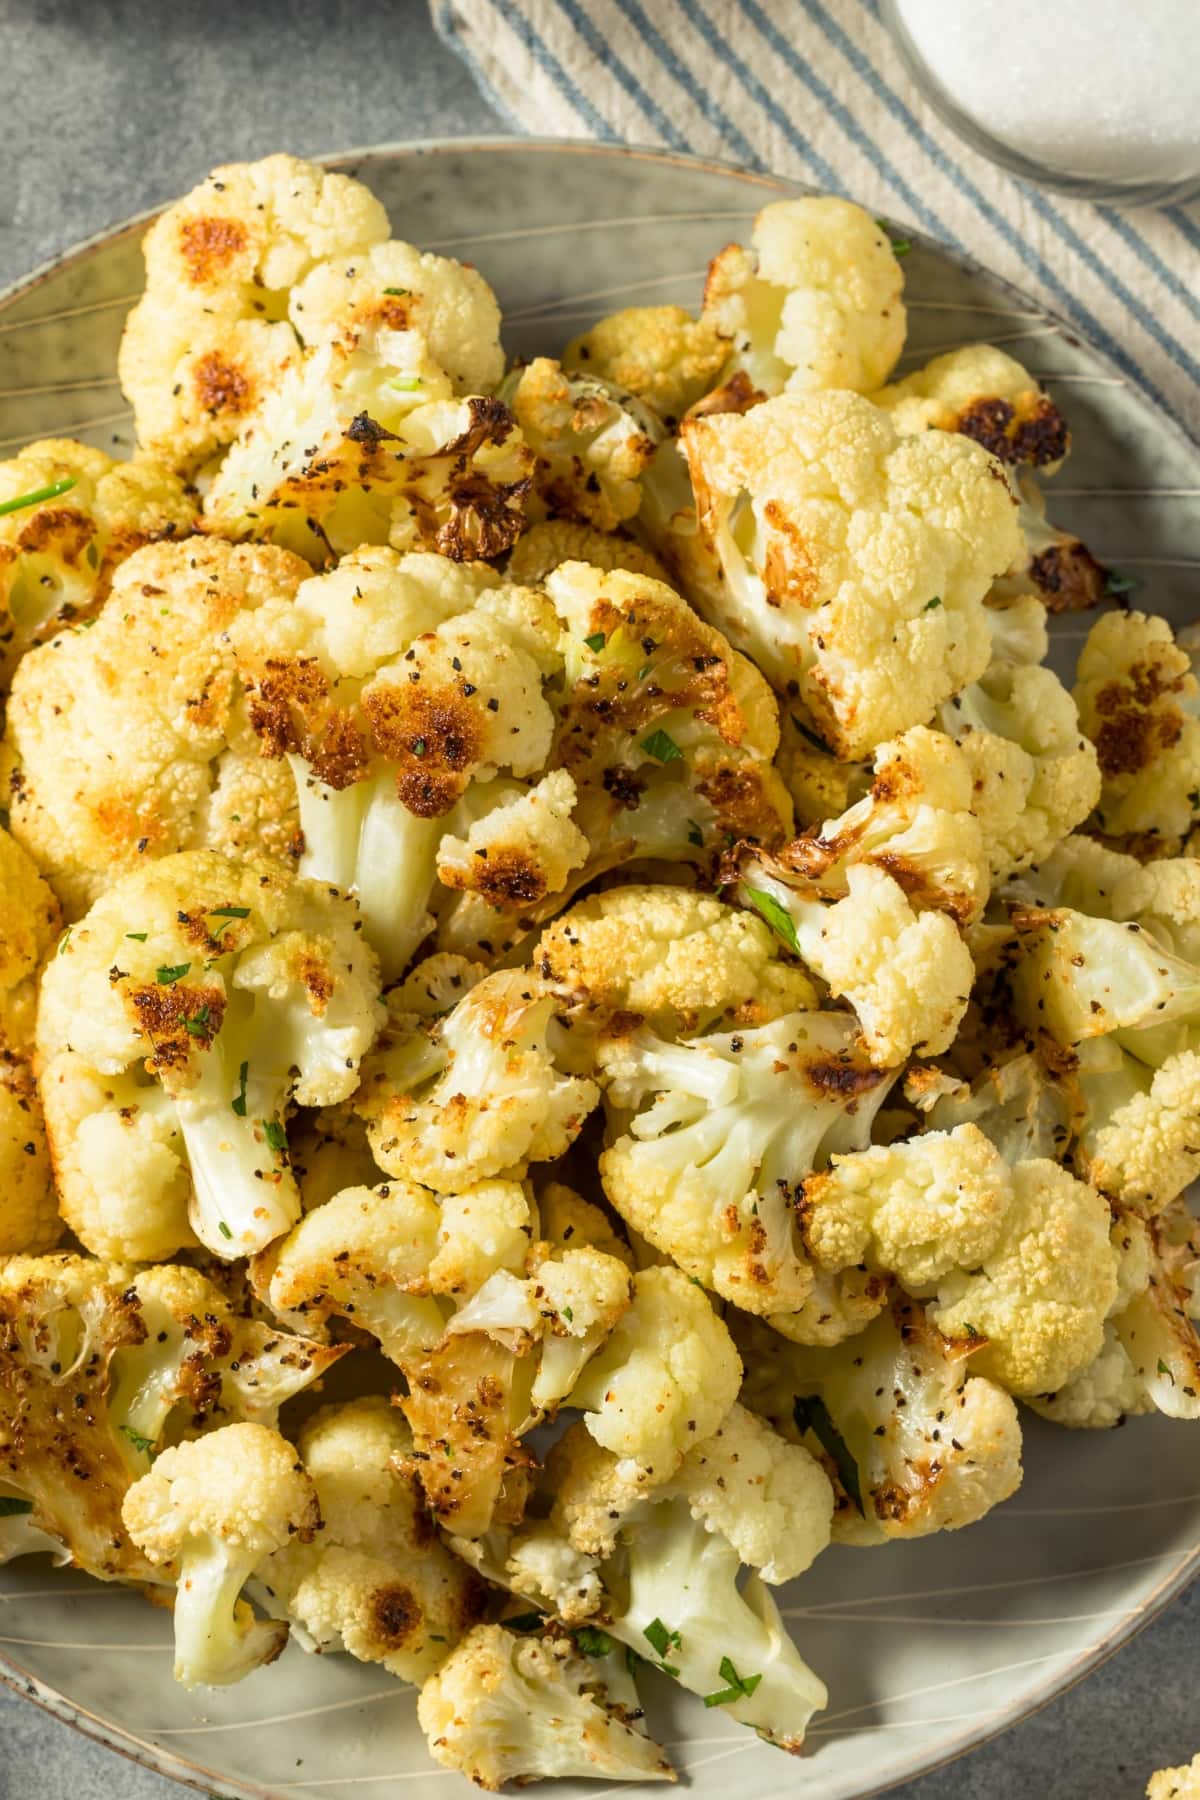 Bunch of roasted cauliflower in a plate sprinkled with chopped parsley.